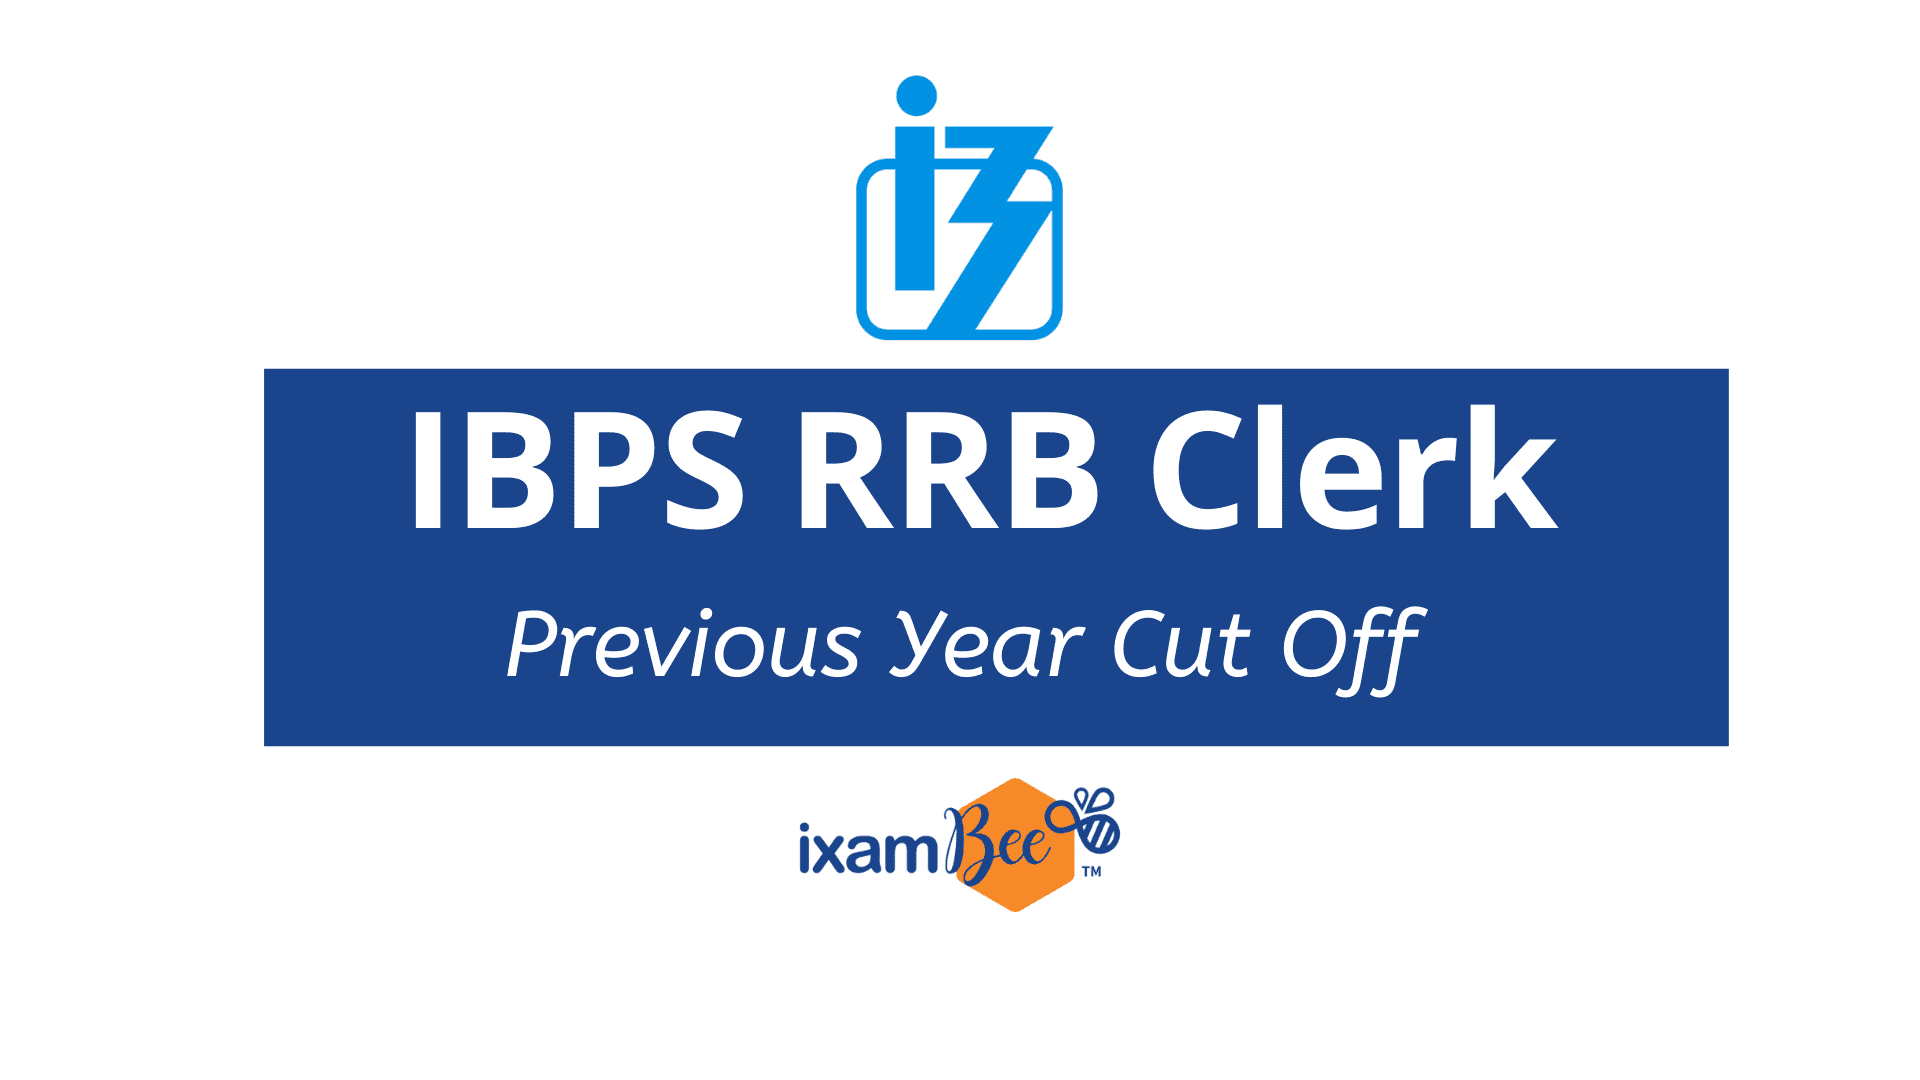 IBPS RRB Group 'B' Office Assistant Previous Year Cut Off